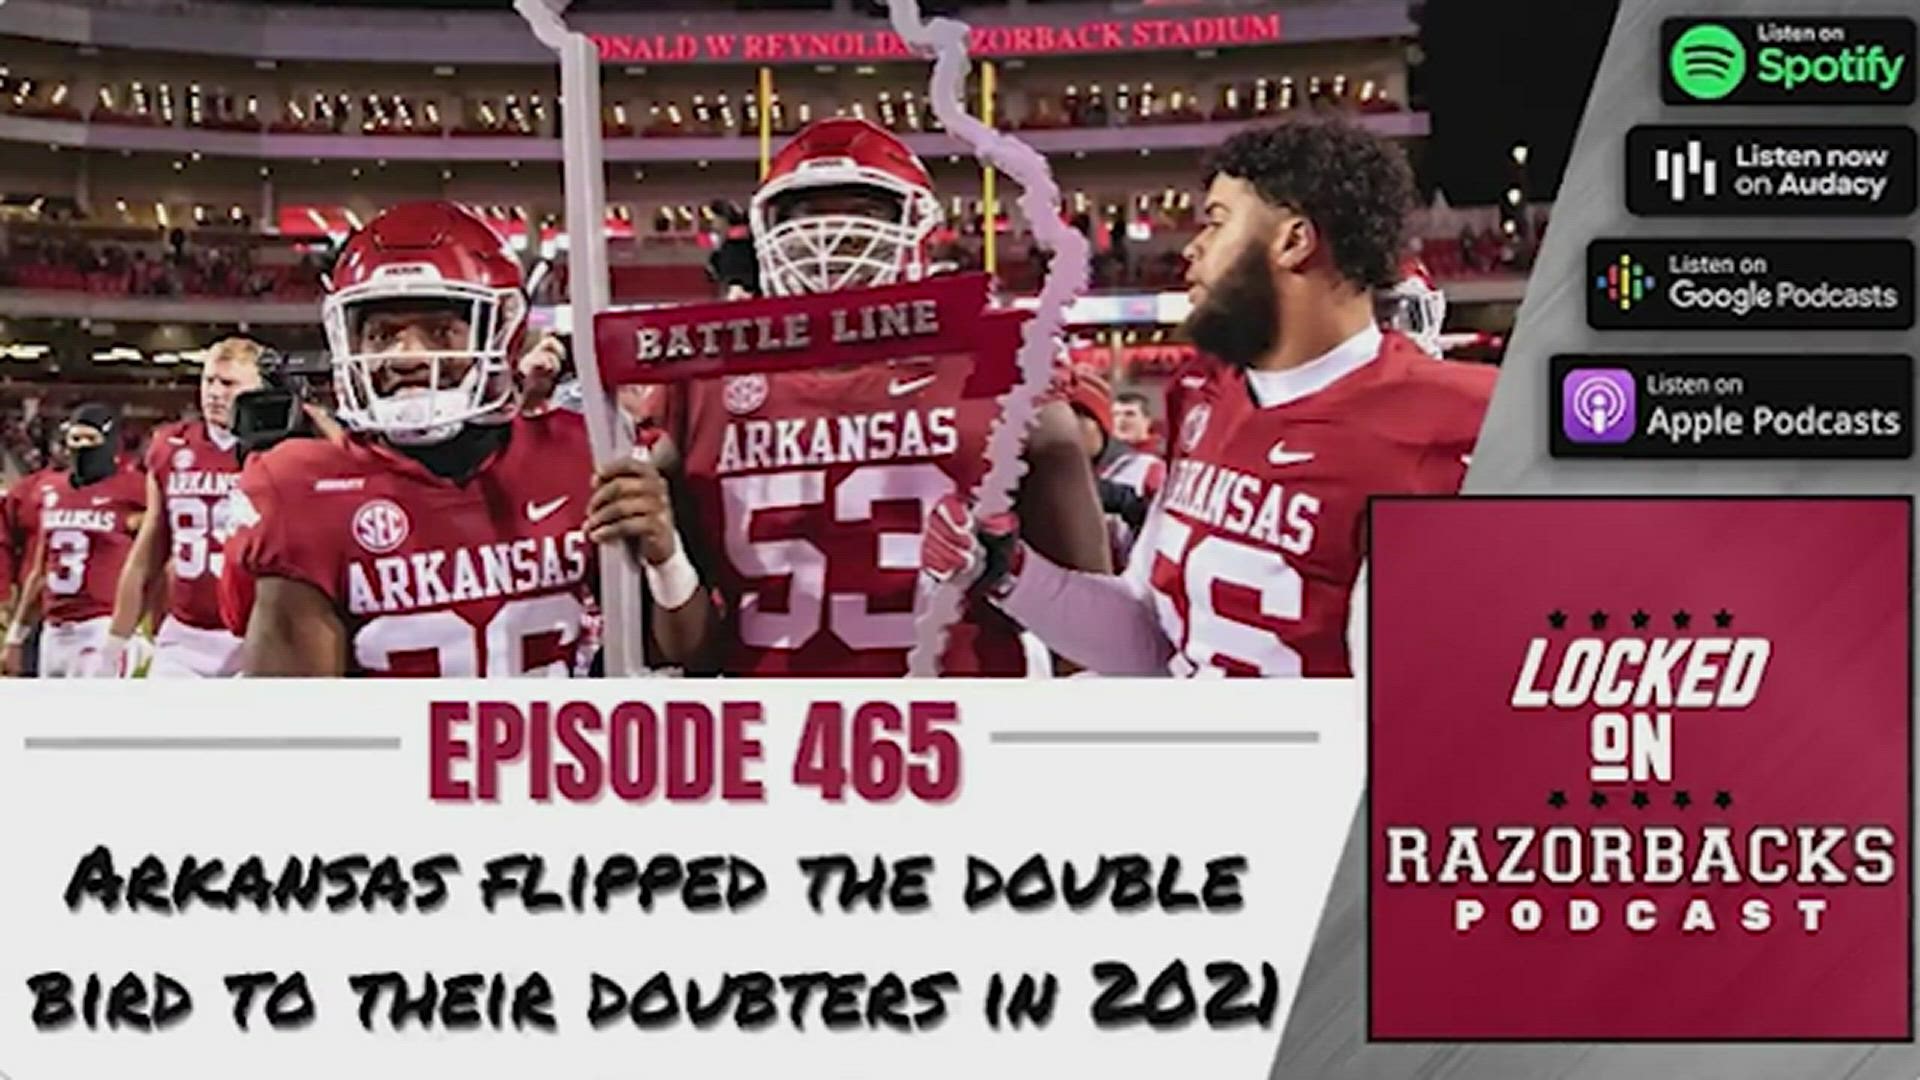 The Hogs put Mizzou back in their place & get the Battle Line Trophy. Podcast host John Nabors talks about all that and more on episode 465.